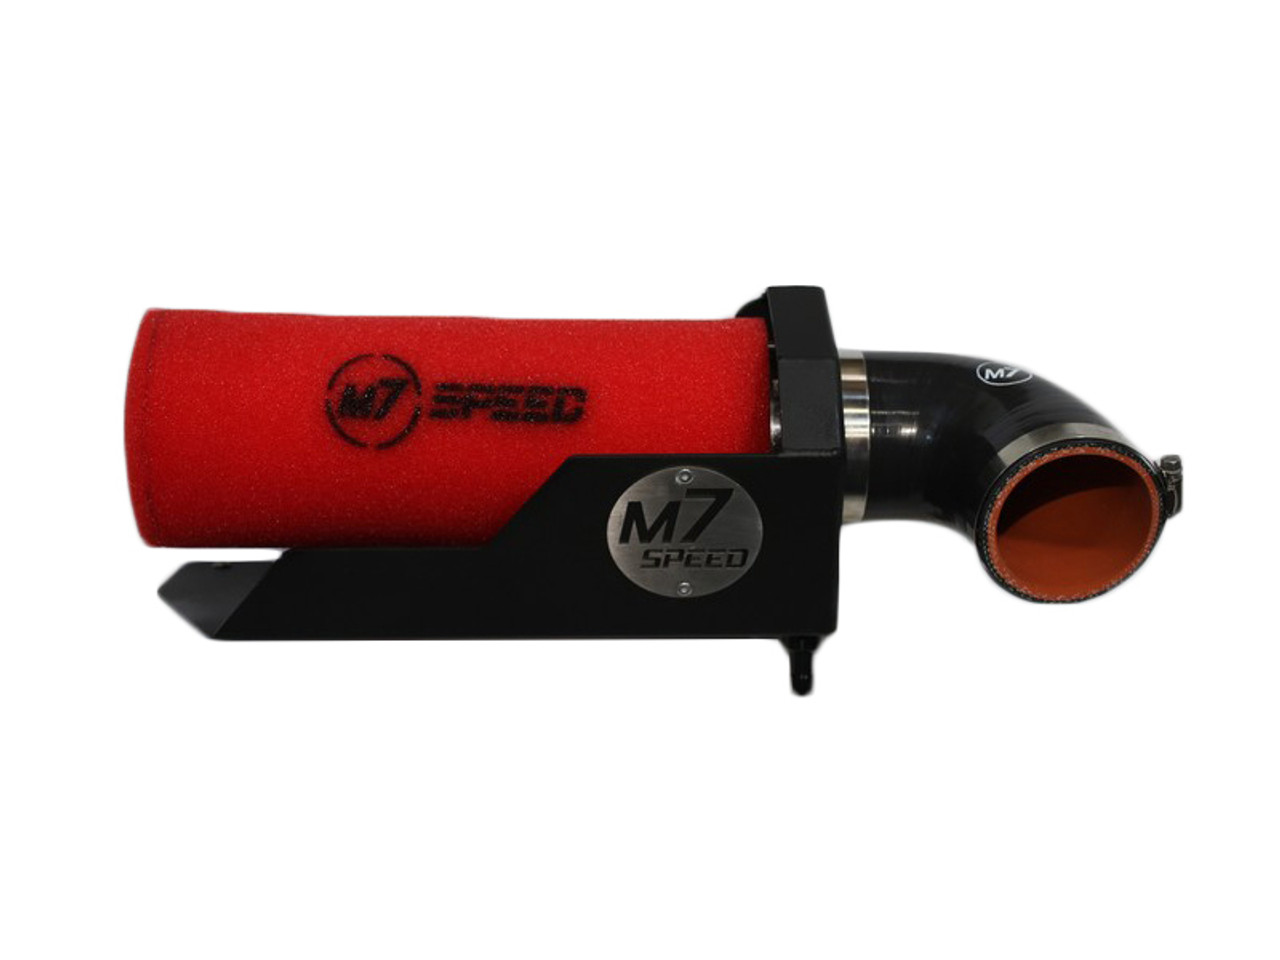 M7 Speed  World Leader in MINI Cooper Performance Parts and